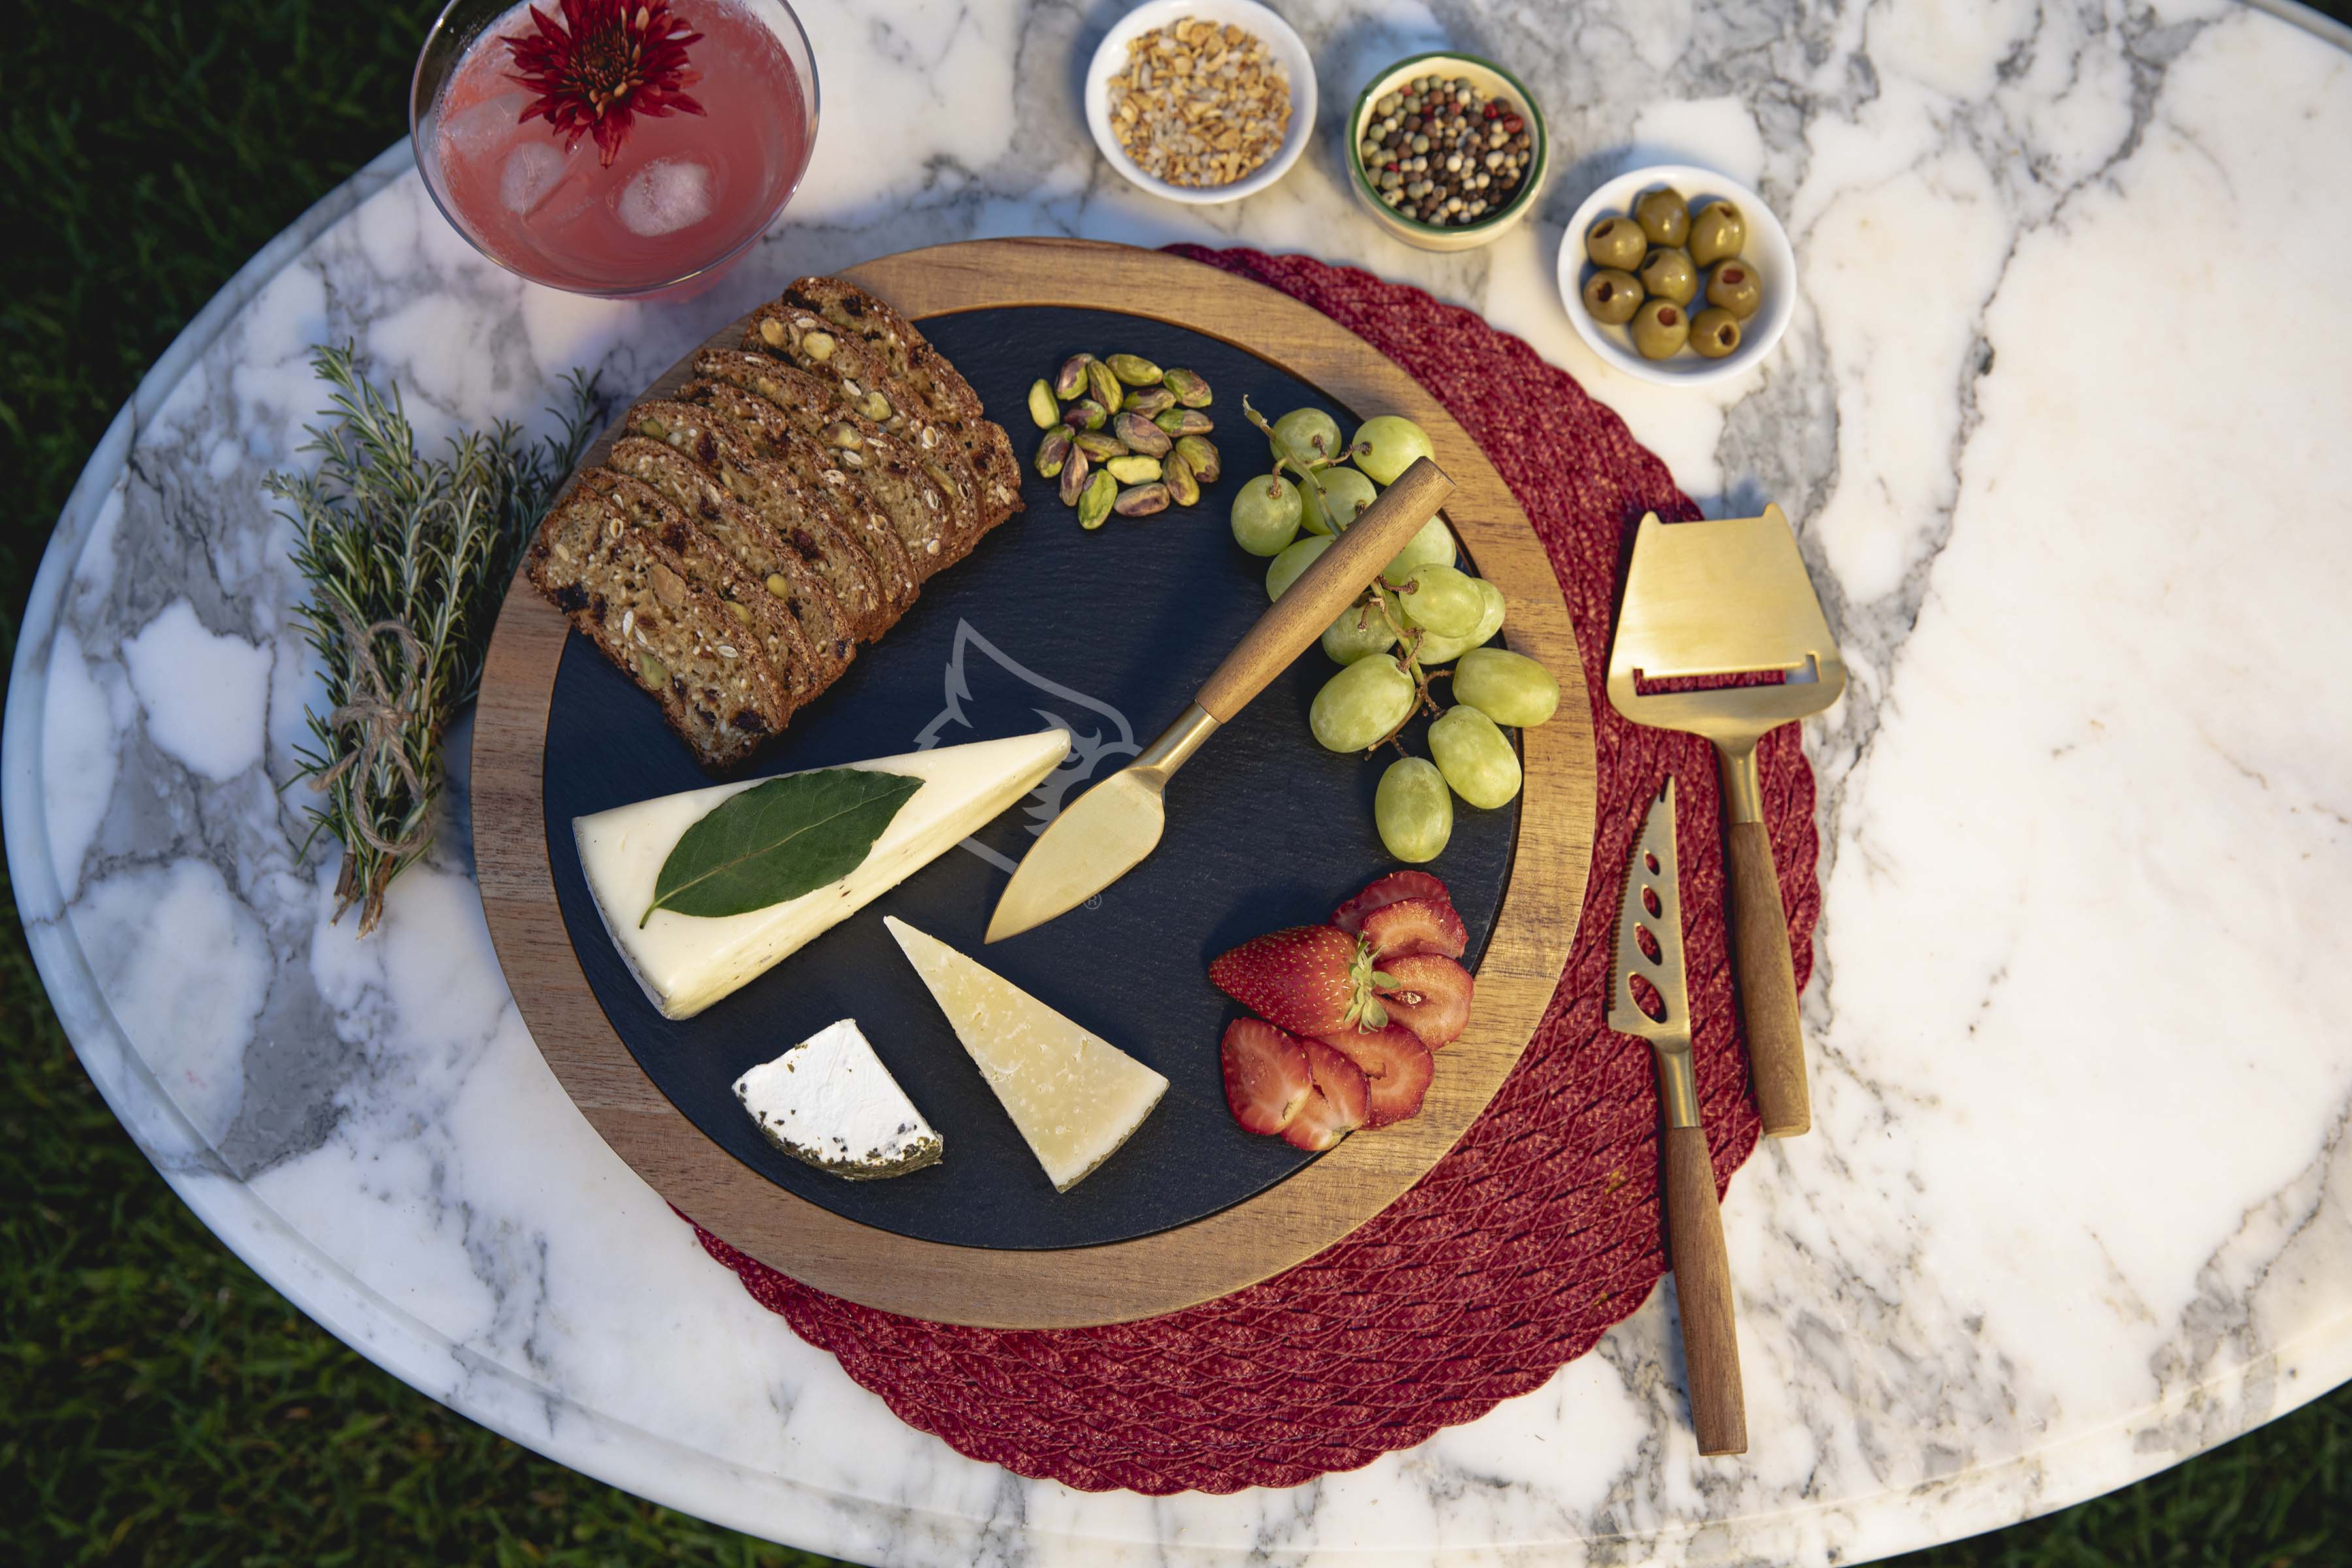 Louisville Cardinals - Insignia Acacia and Slate Serving Board with Cheese Tools